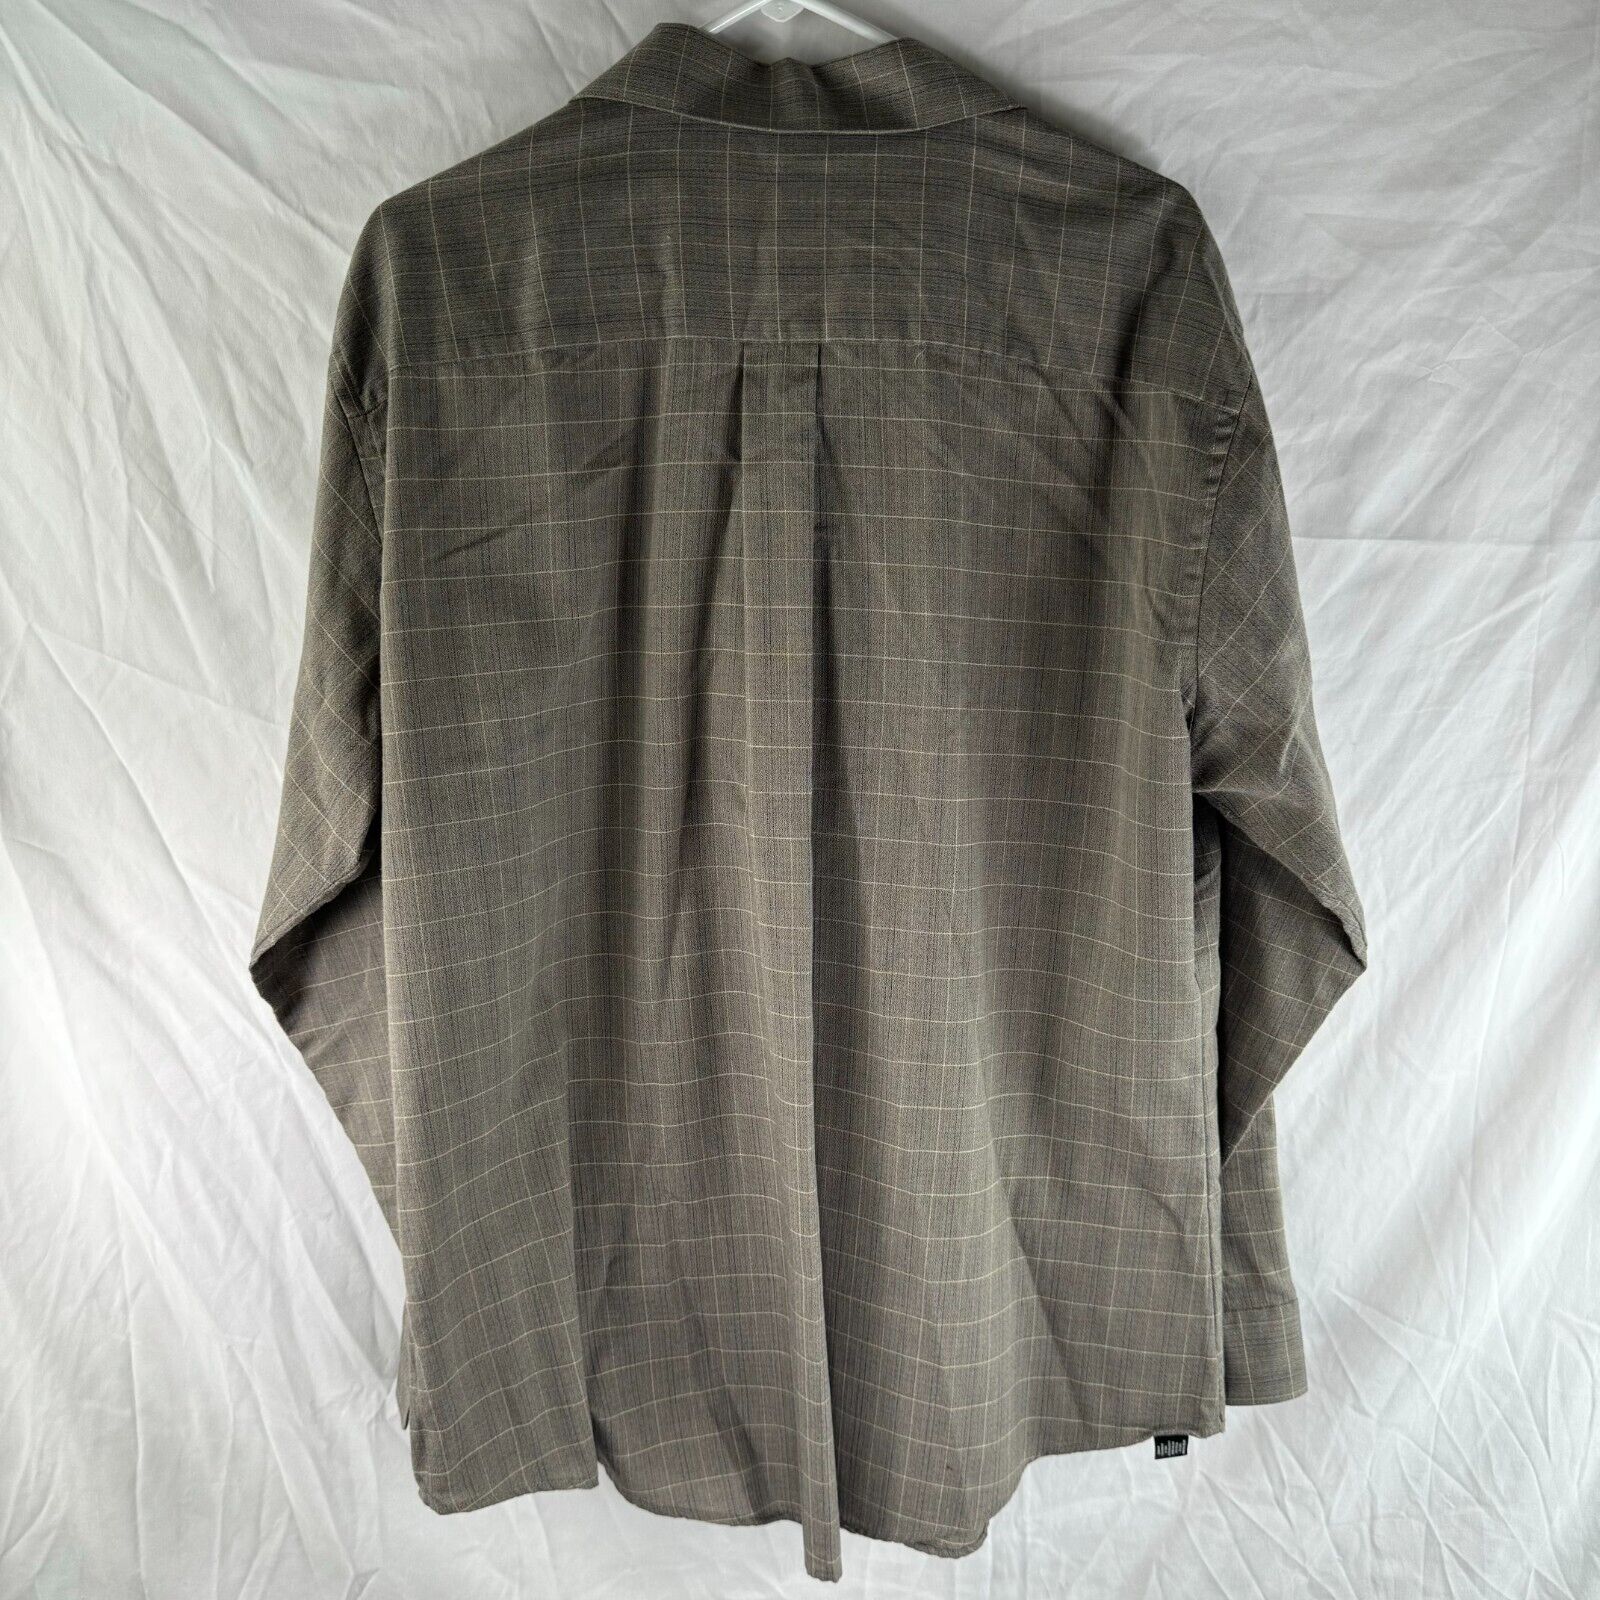 Geoffry Beene Fitted Button Up Wrinkle Free Shirt Gray Olive Green Mens XL 17.5